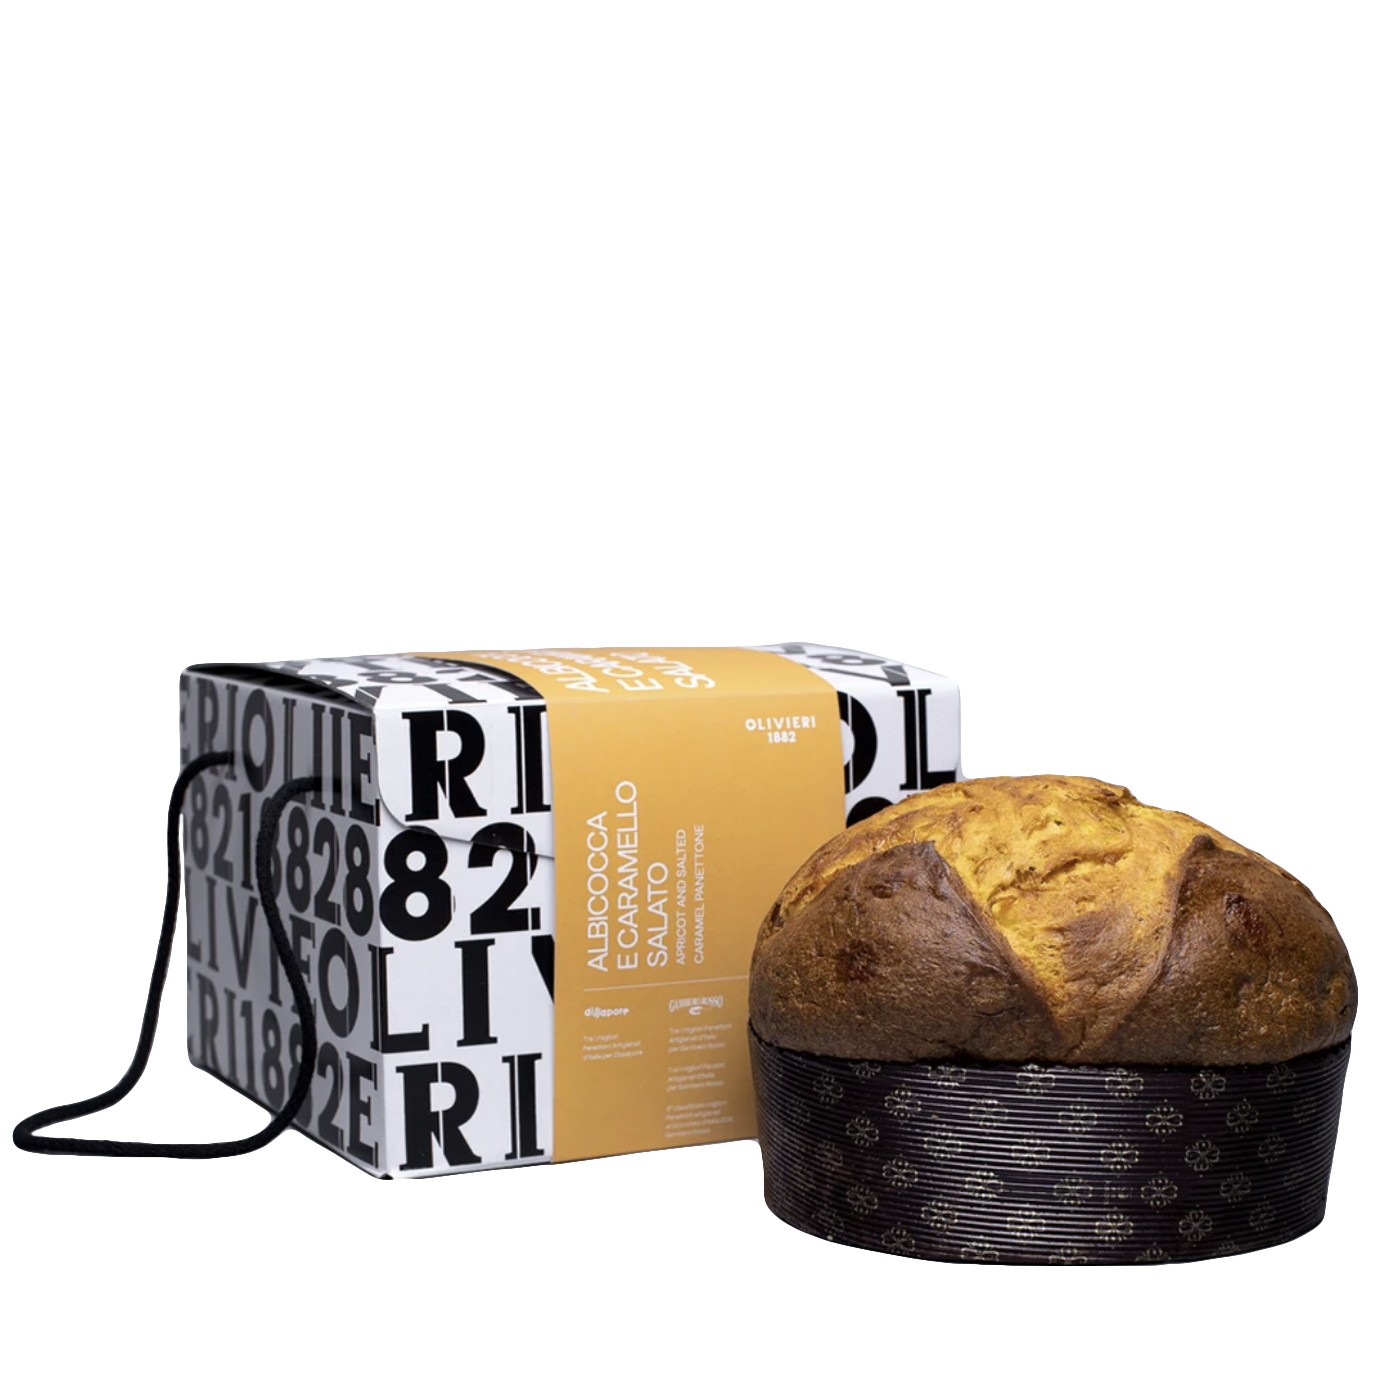 Apricots and Salted Caramel Panettone in Box 26.4 oz